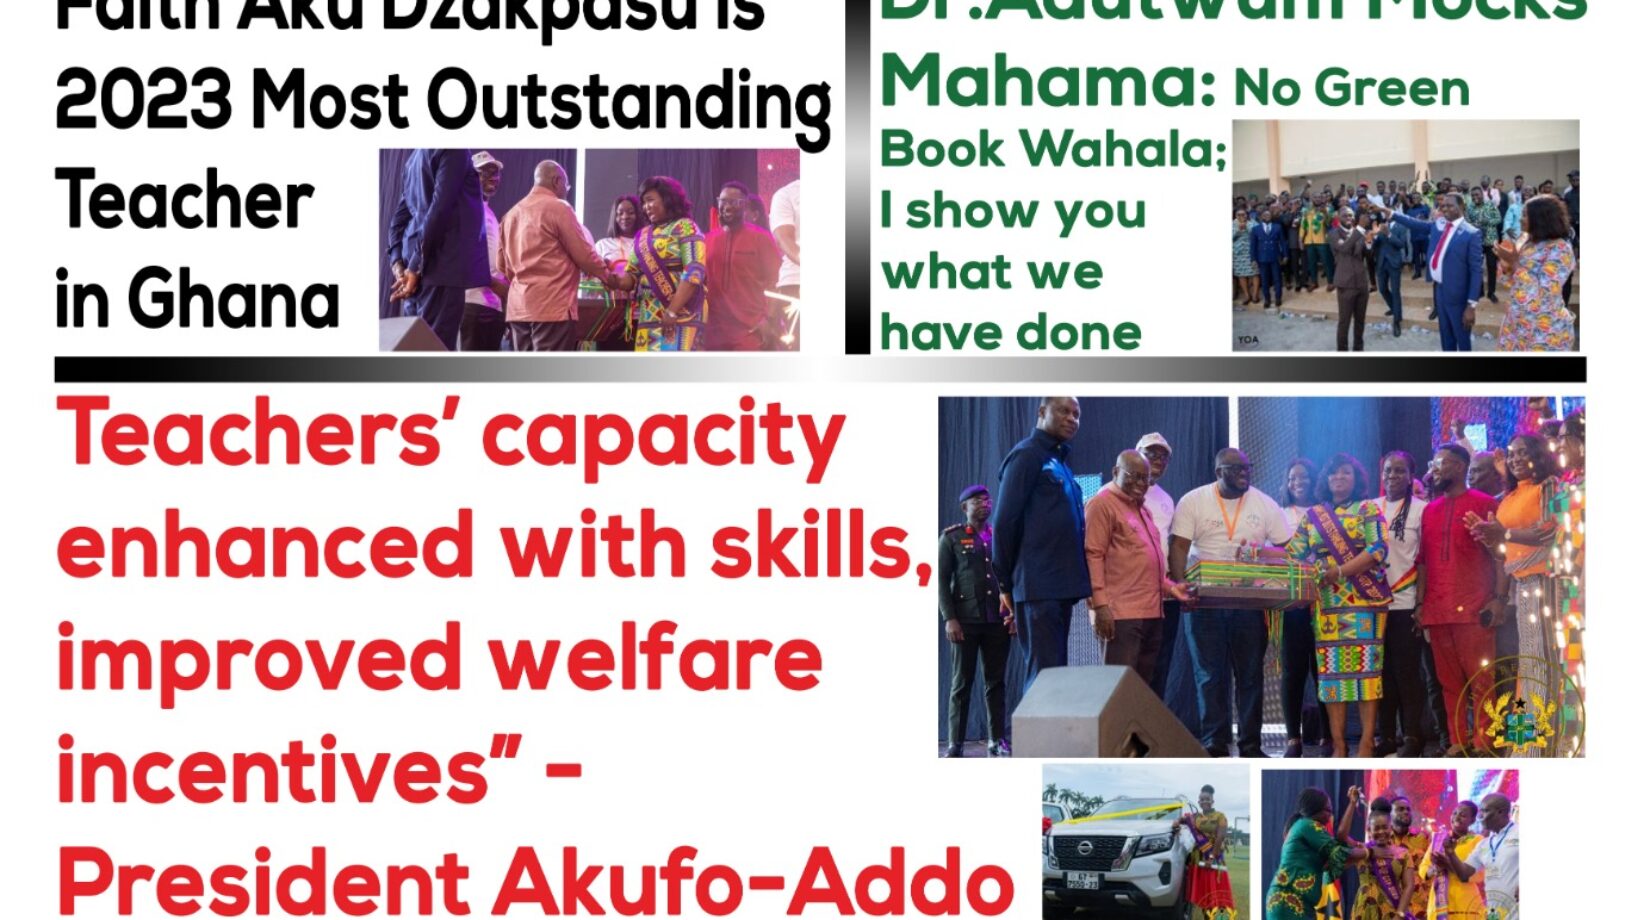 Friday,6th October 2023 Edition of The New Trust Newspaper